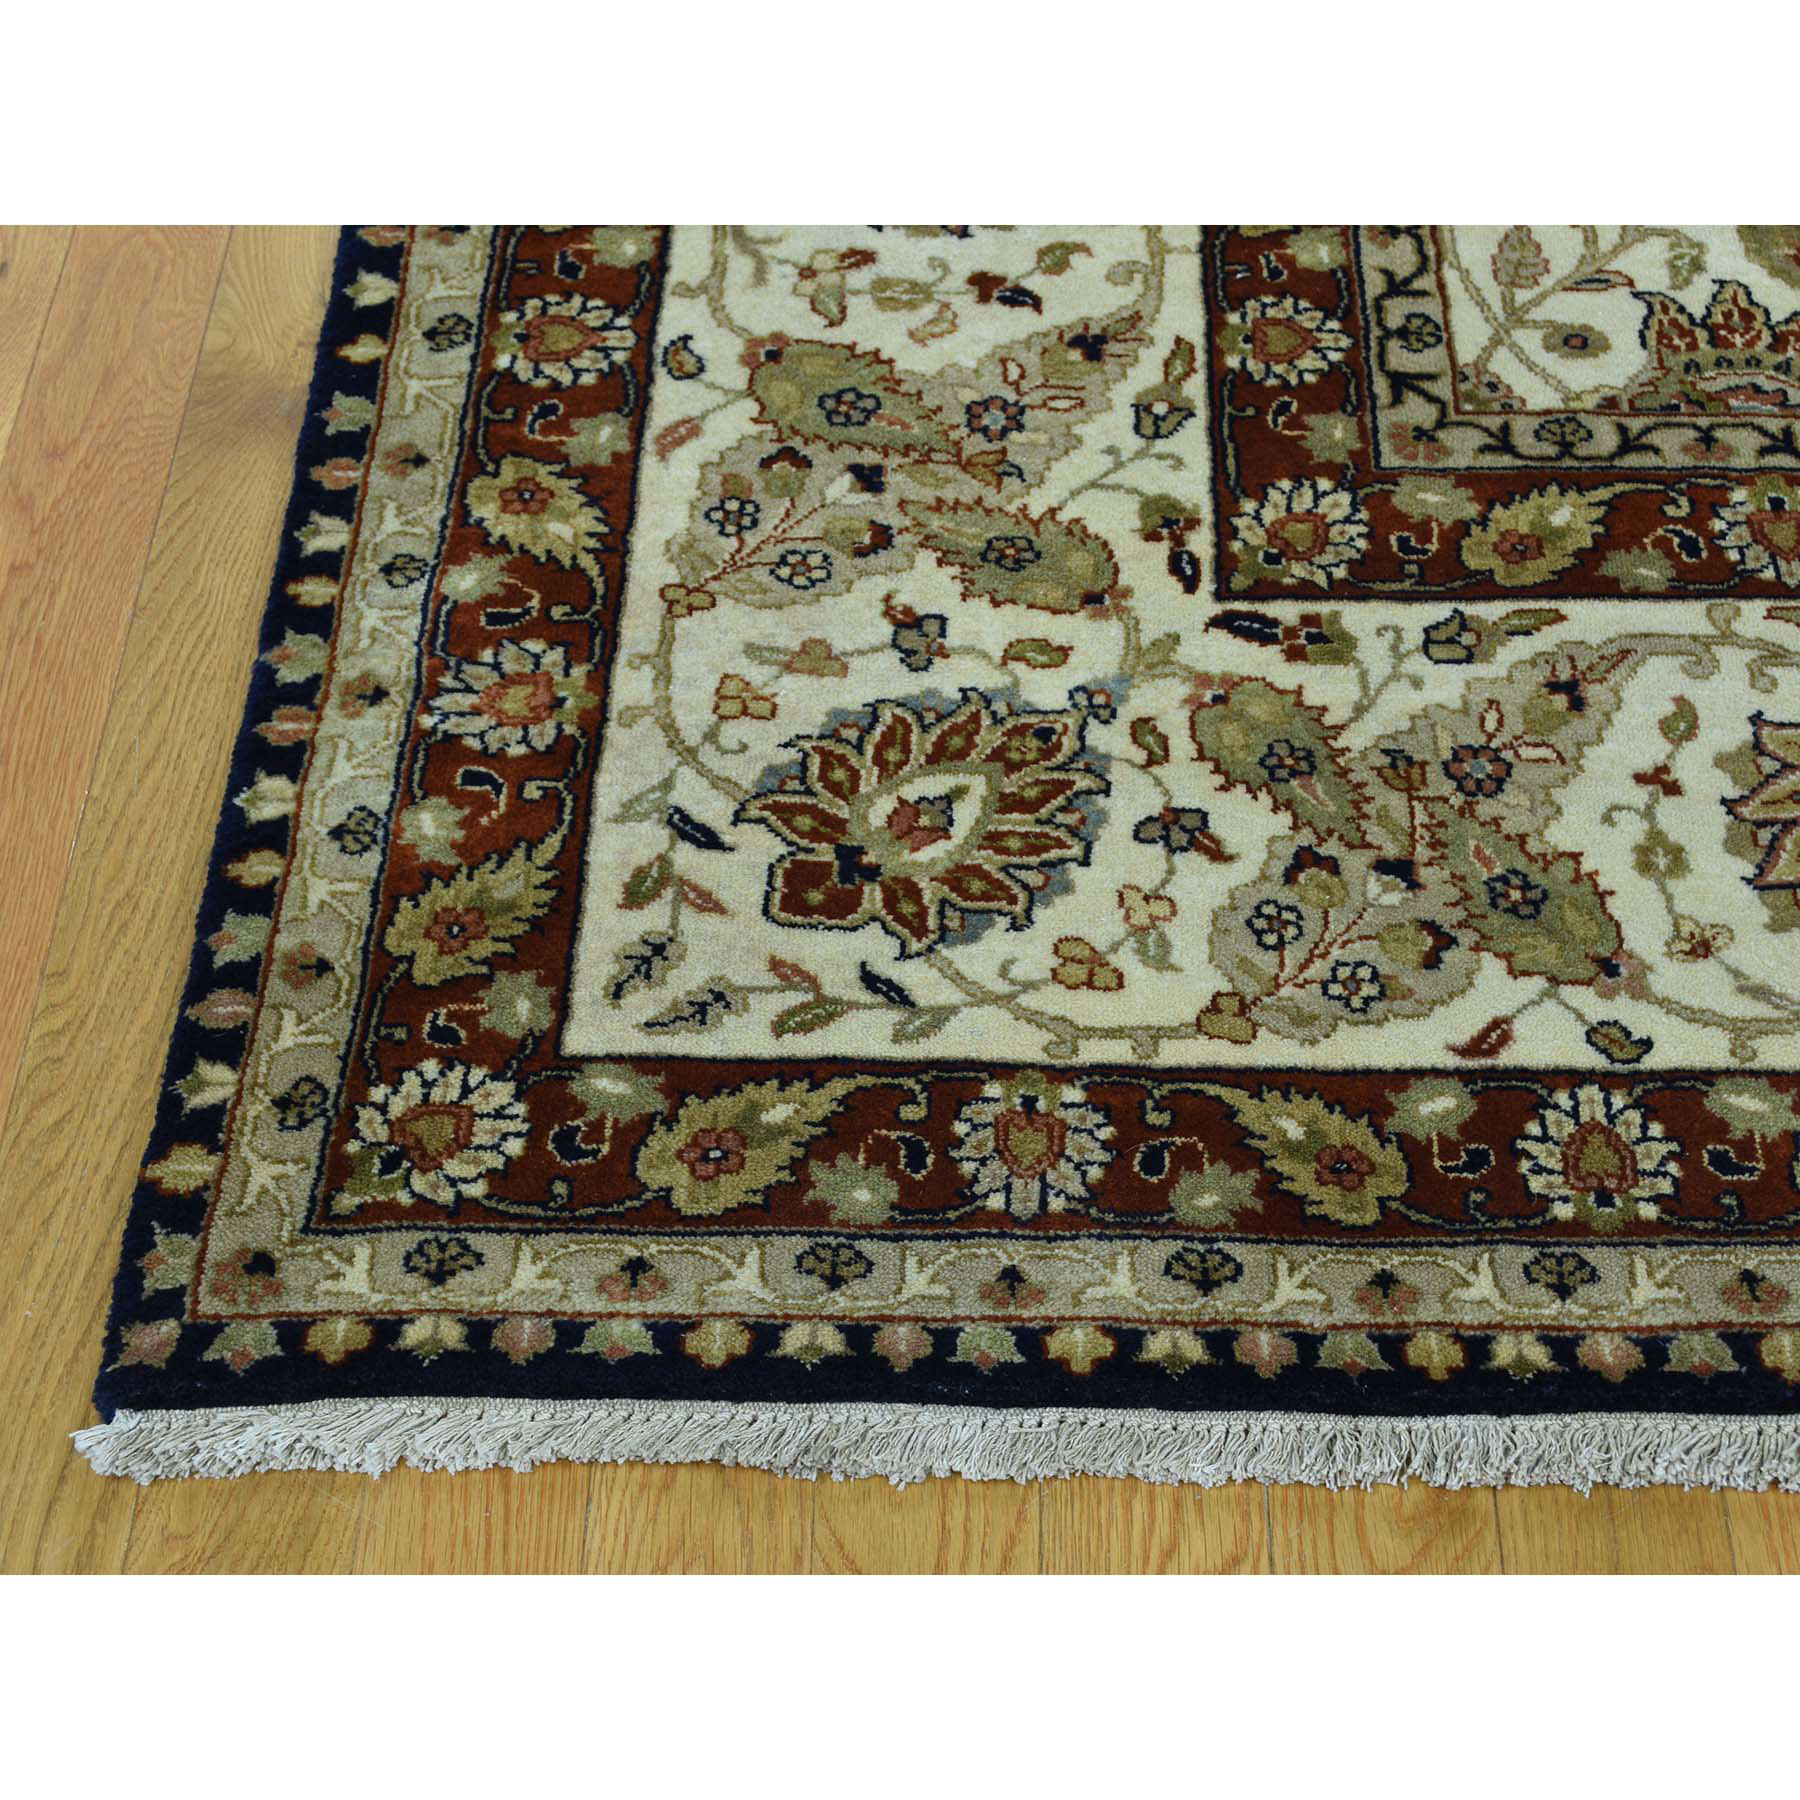 10-2 x13-7  Fine Oriental Pure Wool Antiqued Tabriz Hand-Knotted Rug 